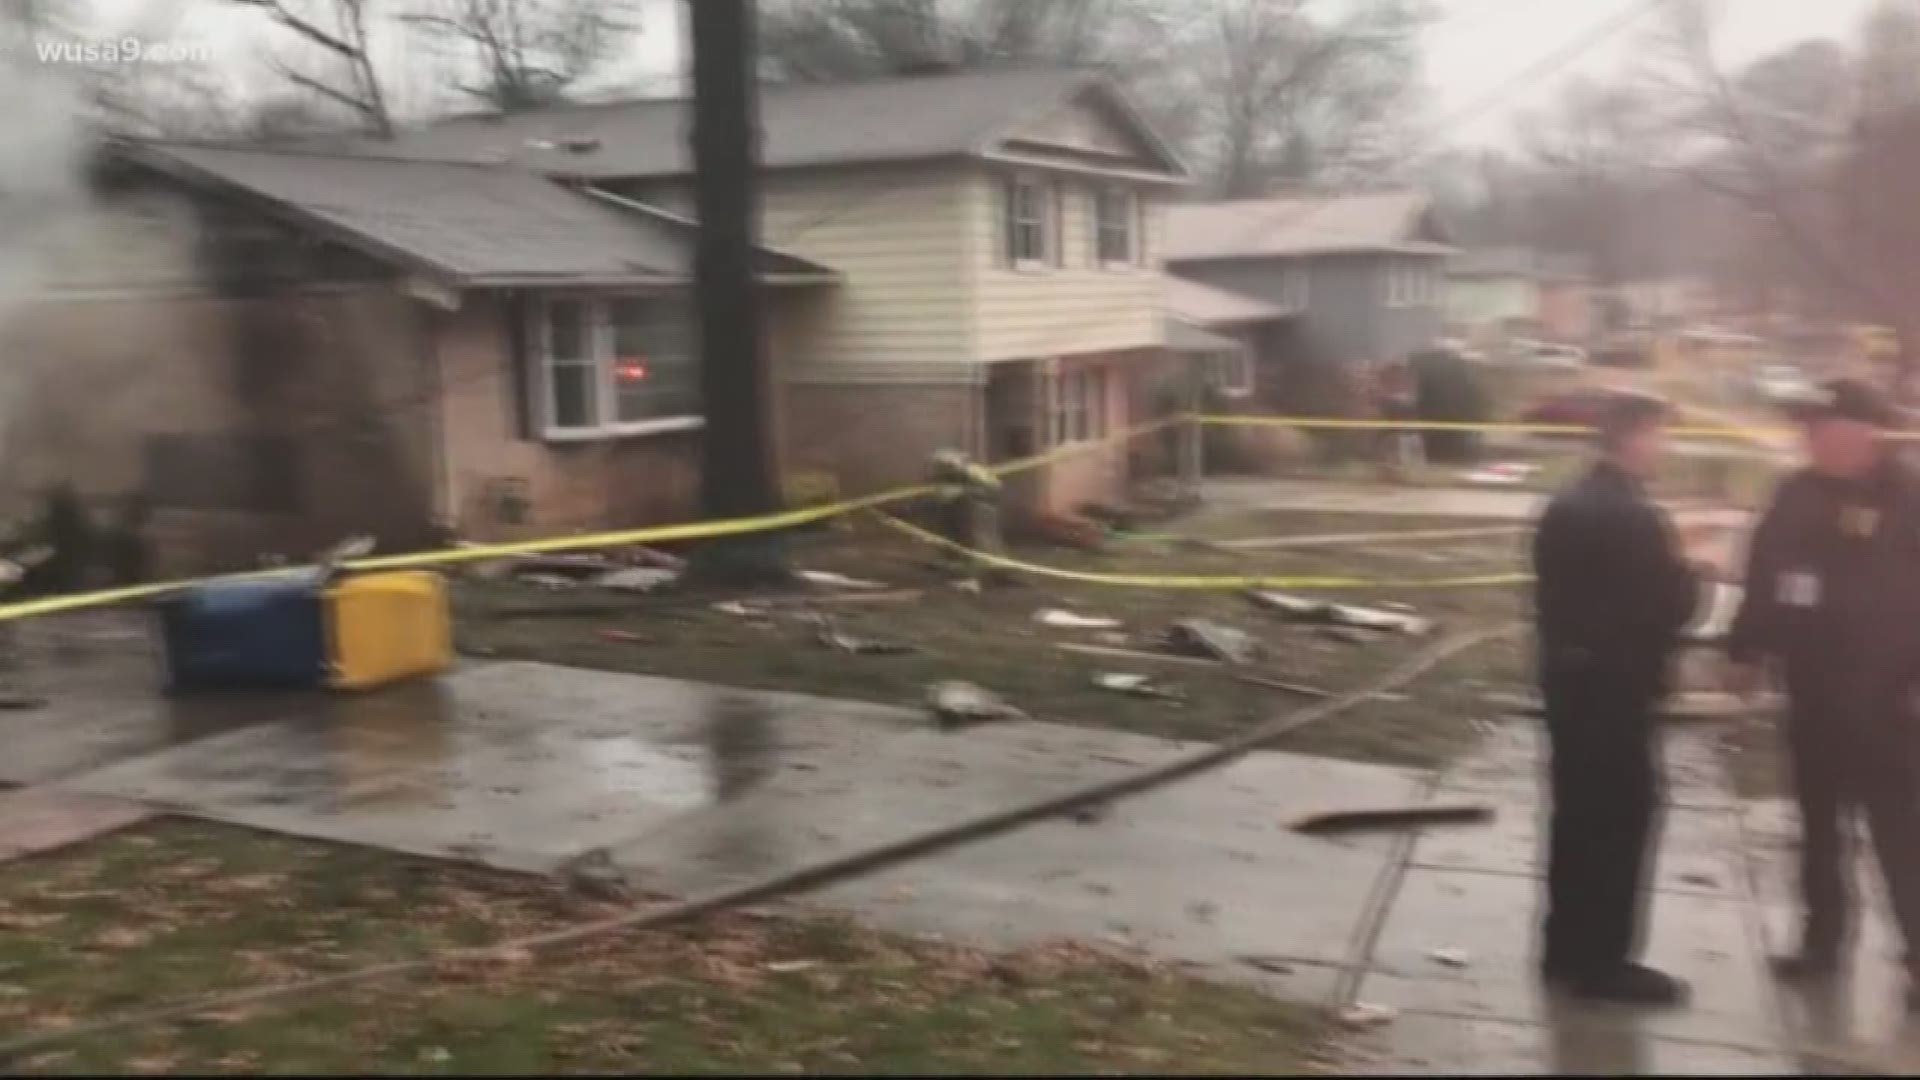 WUSA9's aviation reporter Pete Muntean, who is also a pilot, shares his perspective on the events that led to a small plane crashing into a Maryland home.